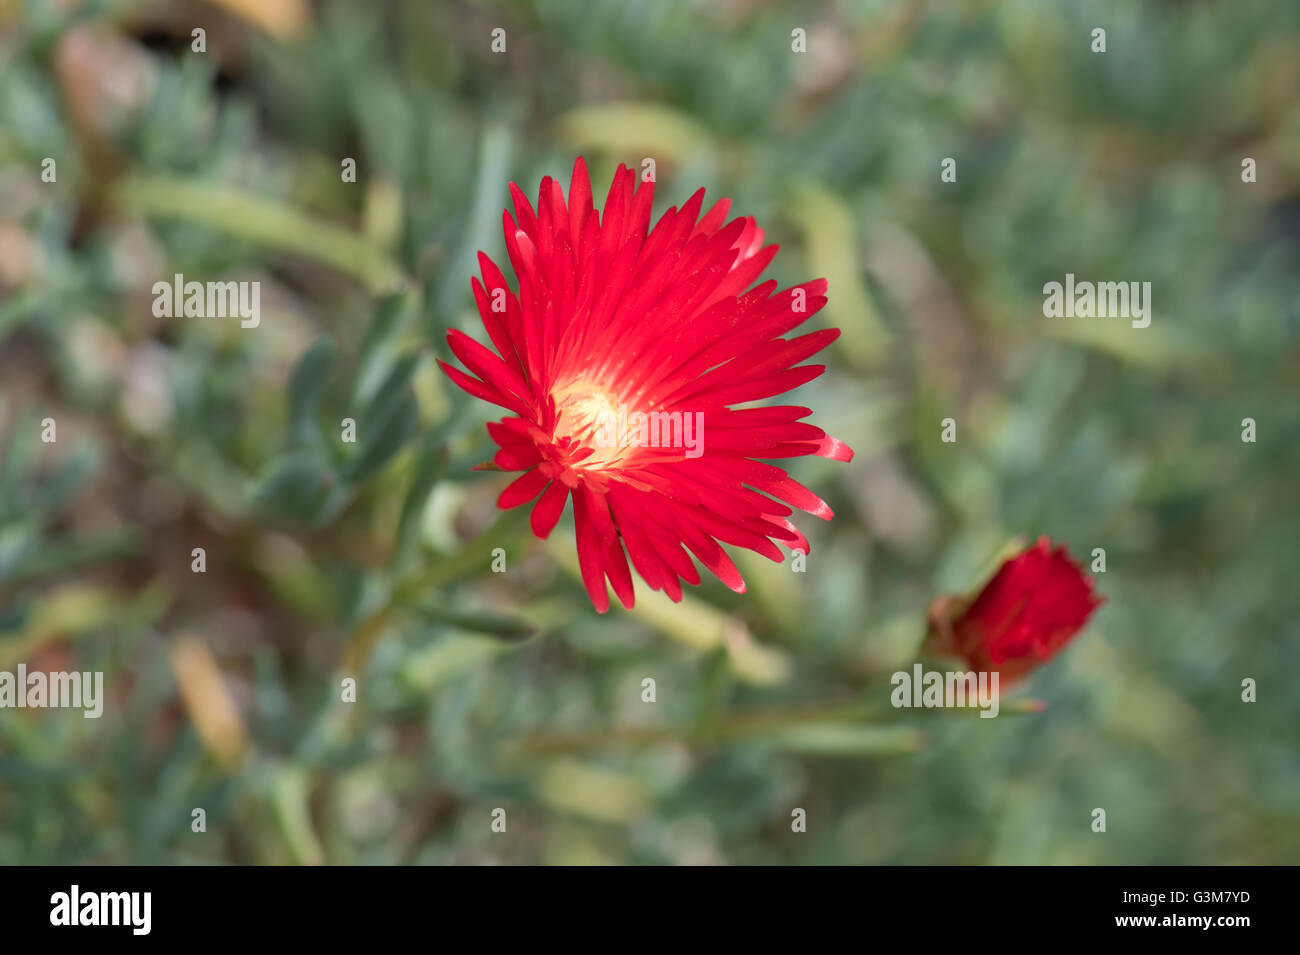 The bright red flowers of Lampranthus spectabilis Stock Photo